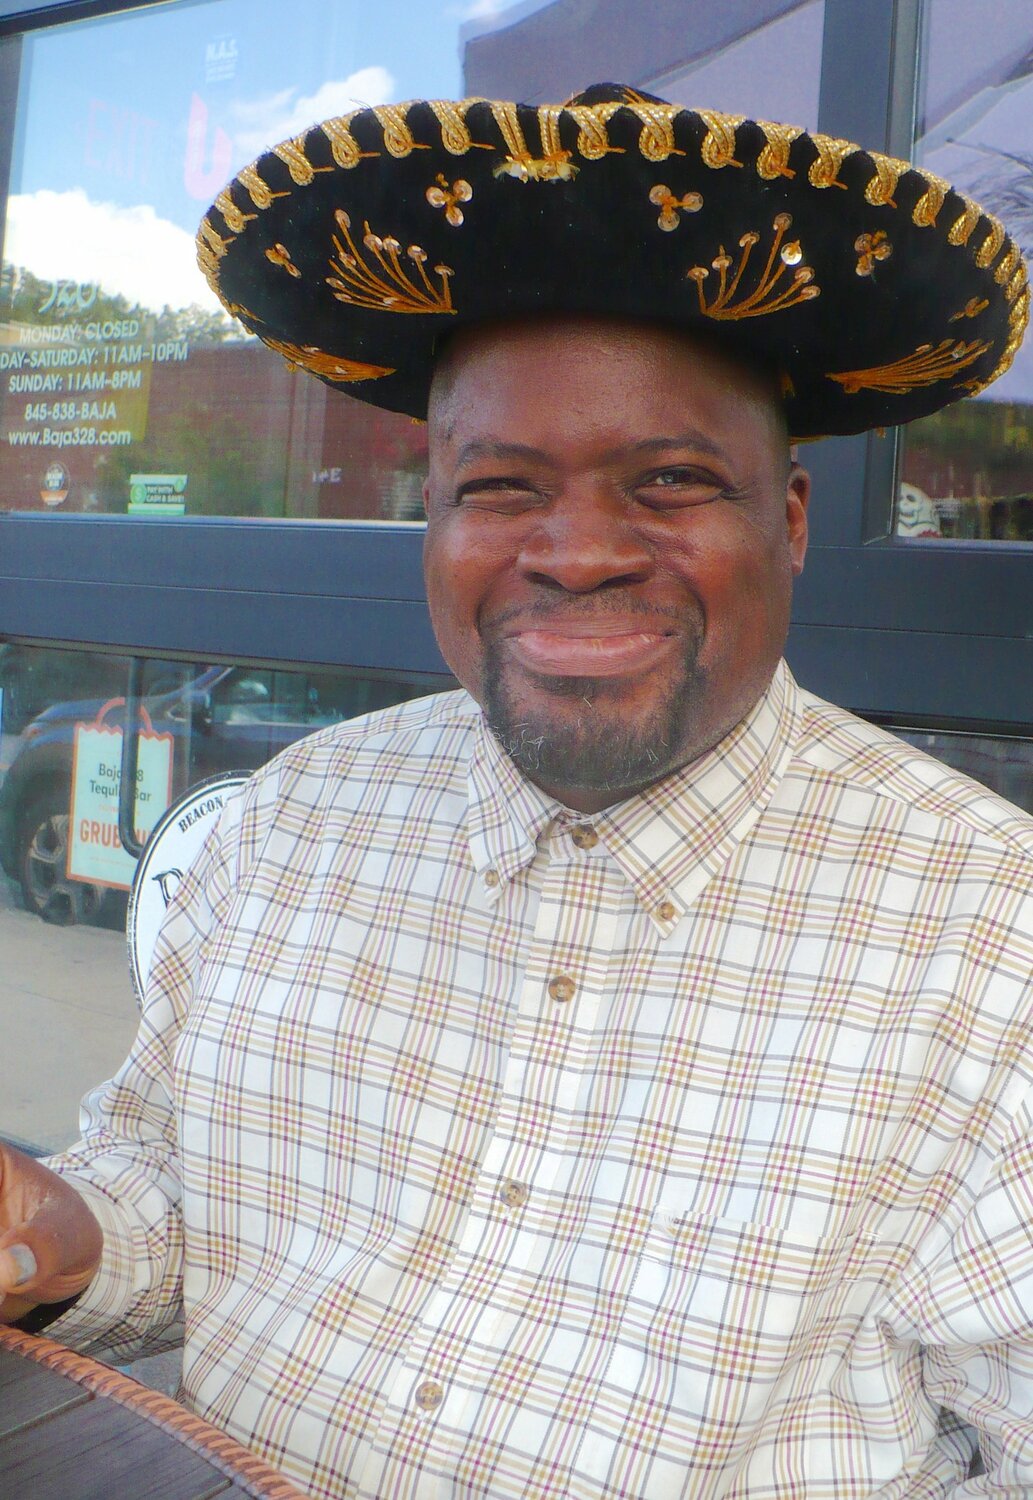 With his trademark sombrero and big smile, Jeffersonville’s Victor Thomas moves on to life in Beacon after nearly 20 years at the Jeffersonville Adult Home on Route 52.